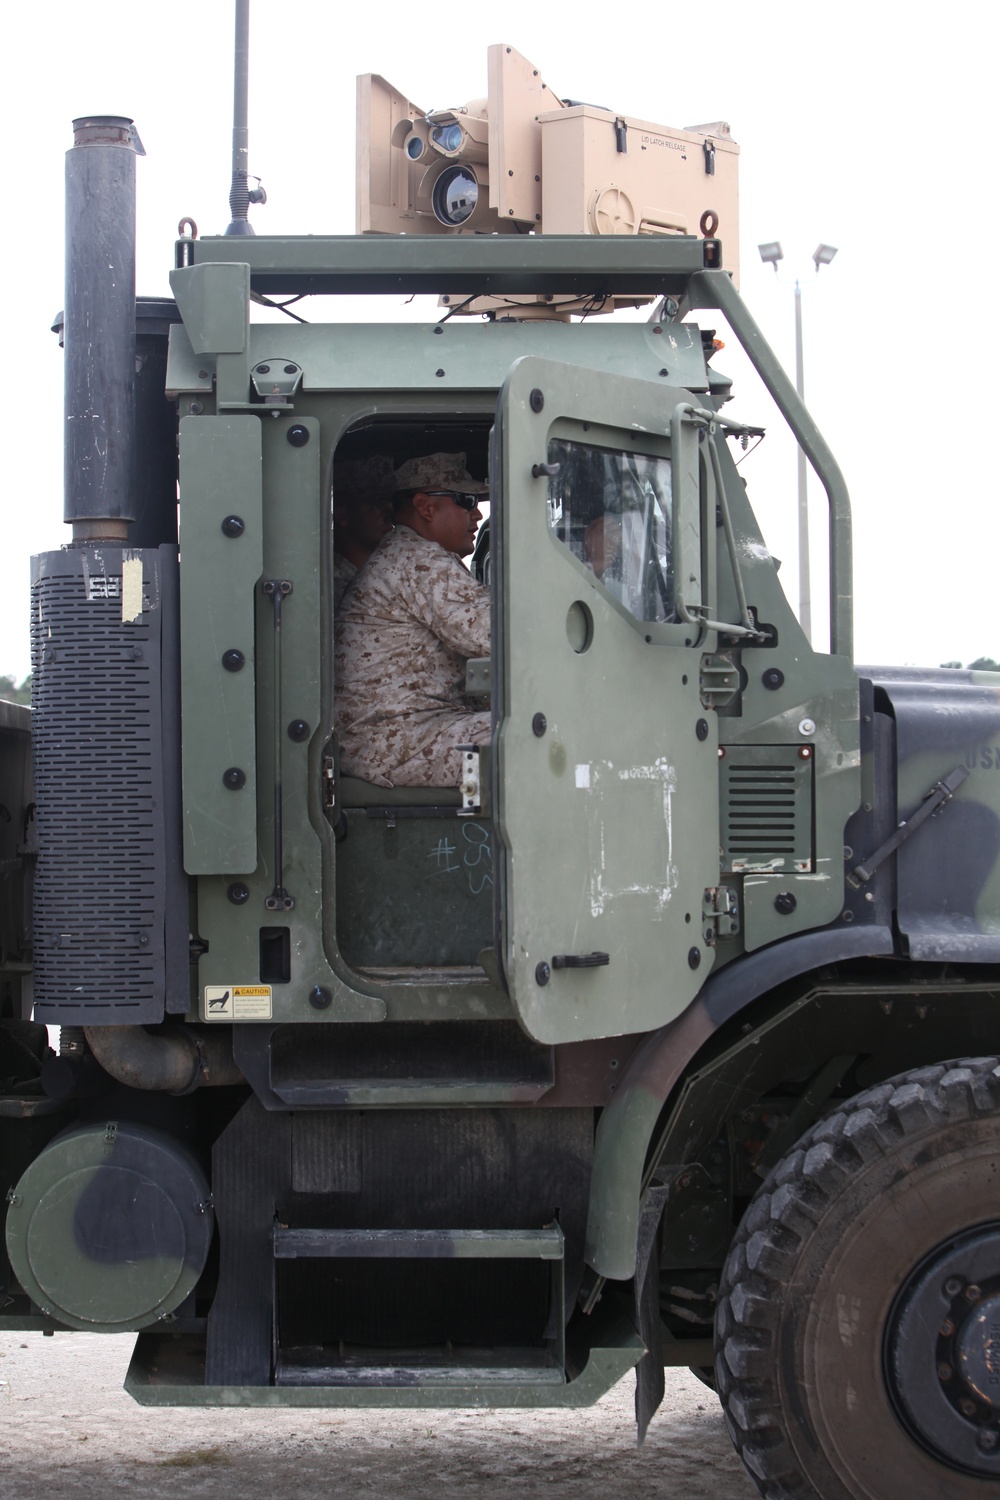 Marines prepare to use new defense system in Afghanistan